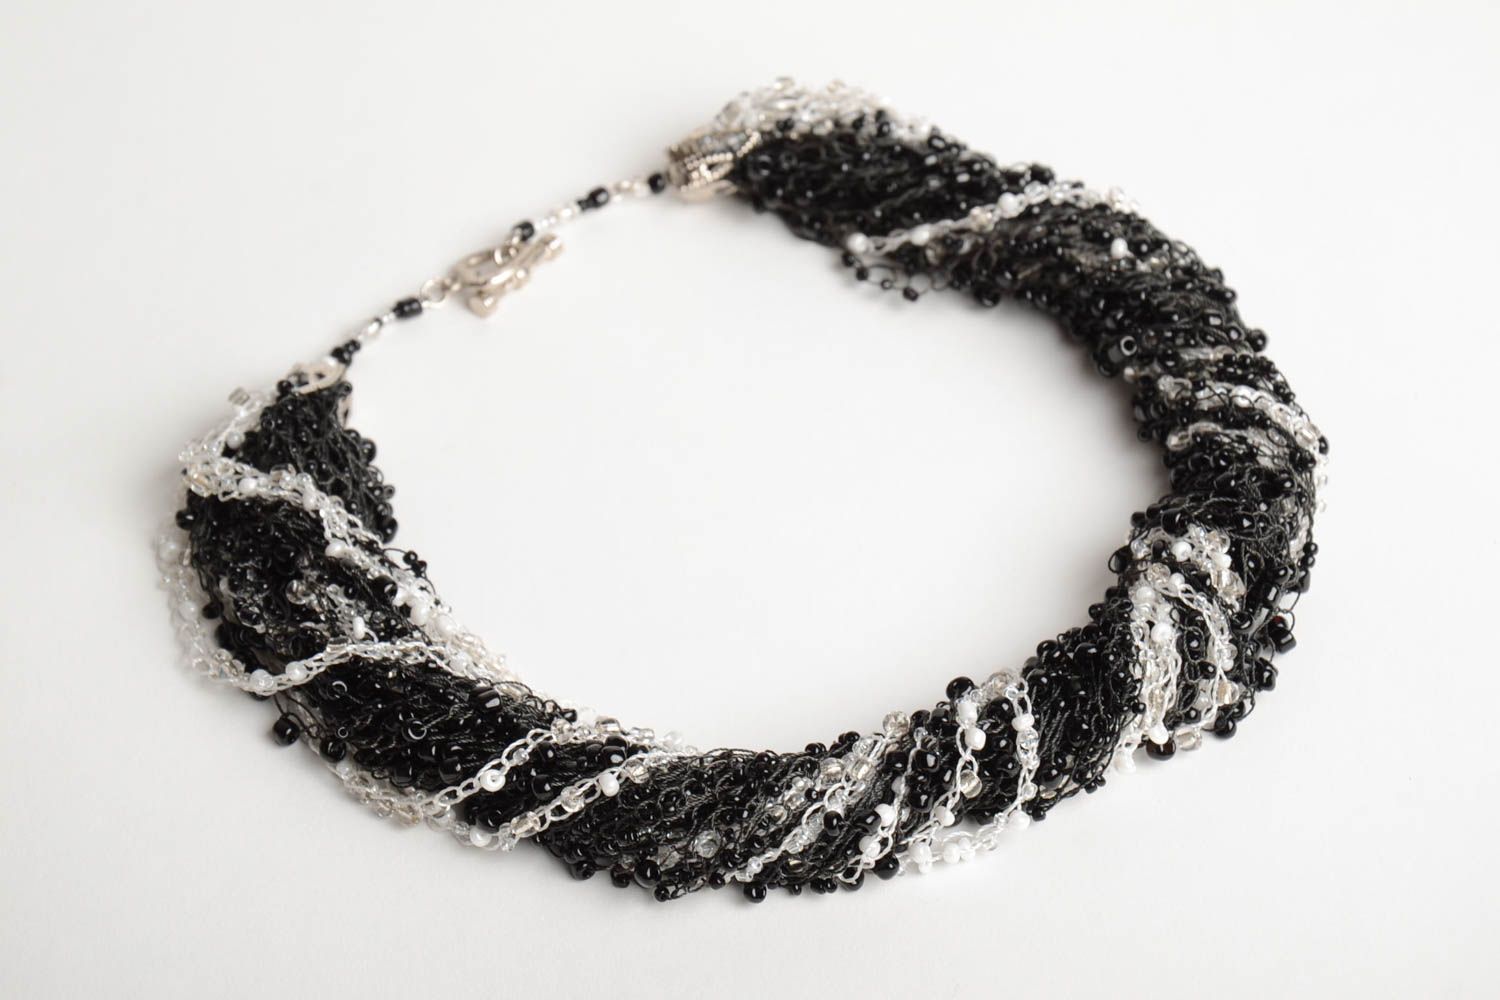 Handmade volume necklace crocheted of Czech beads in black and white colors photo 3